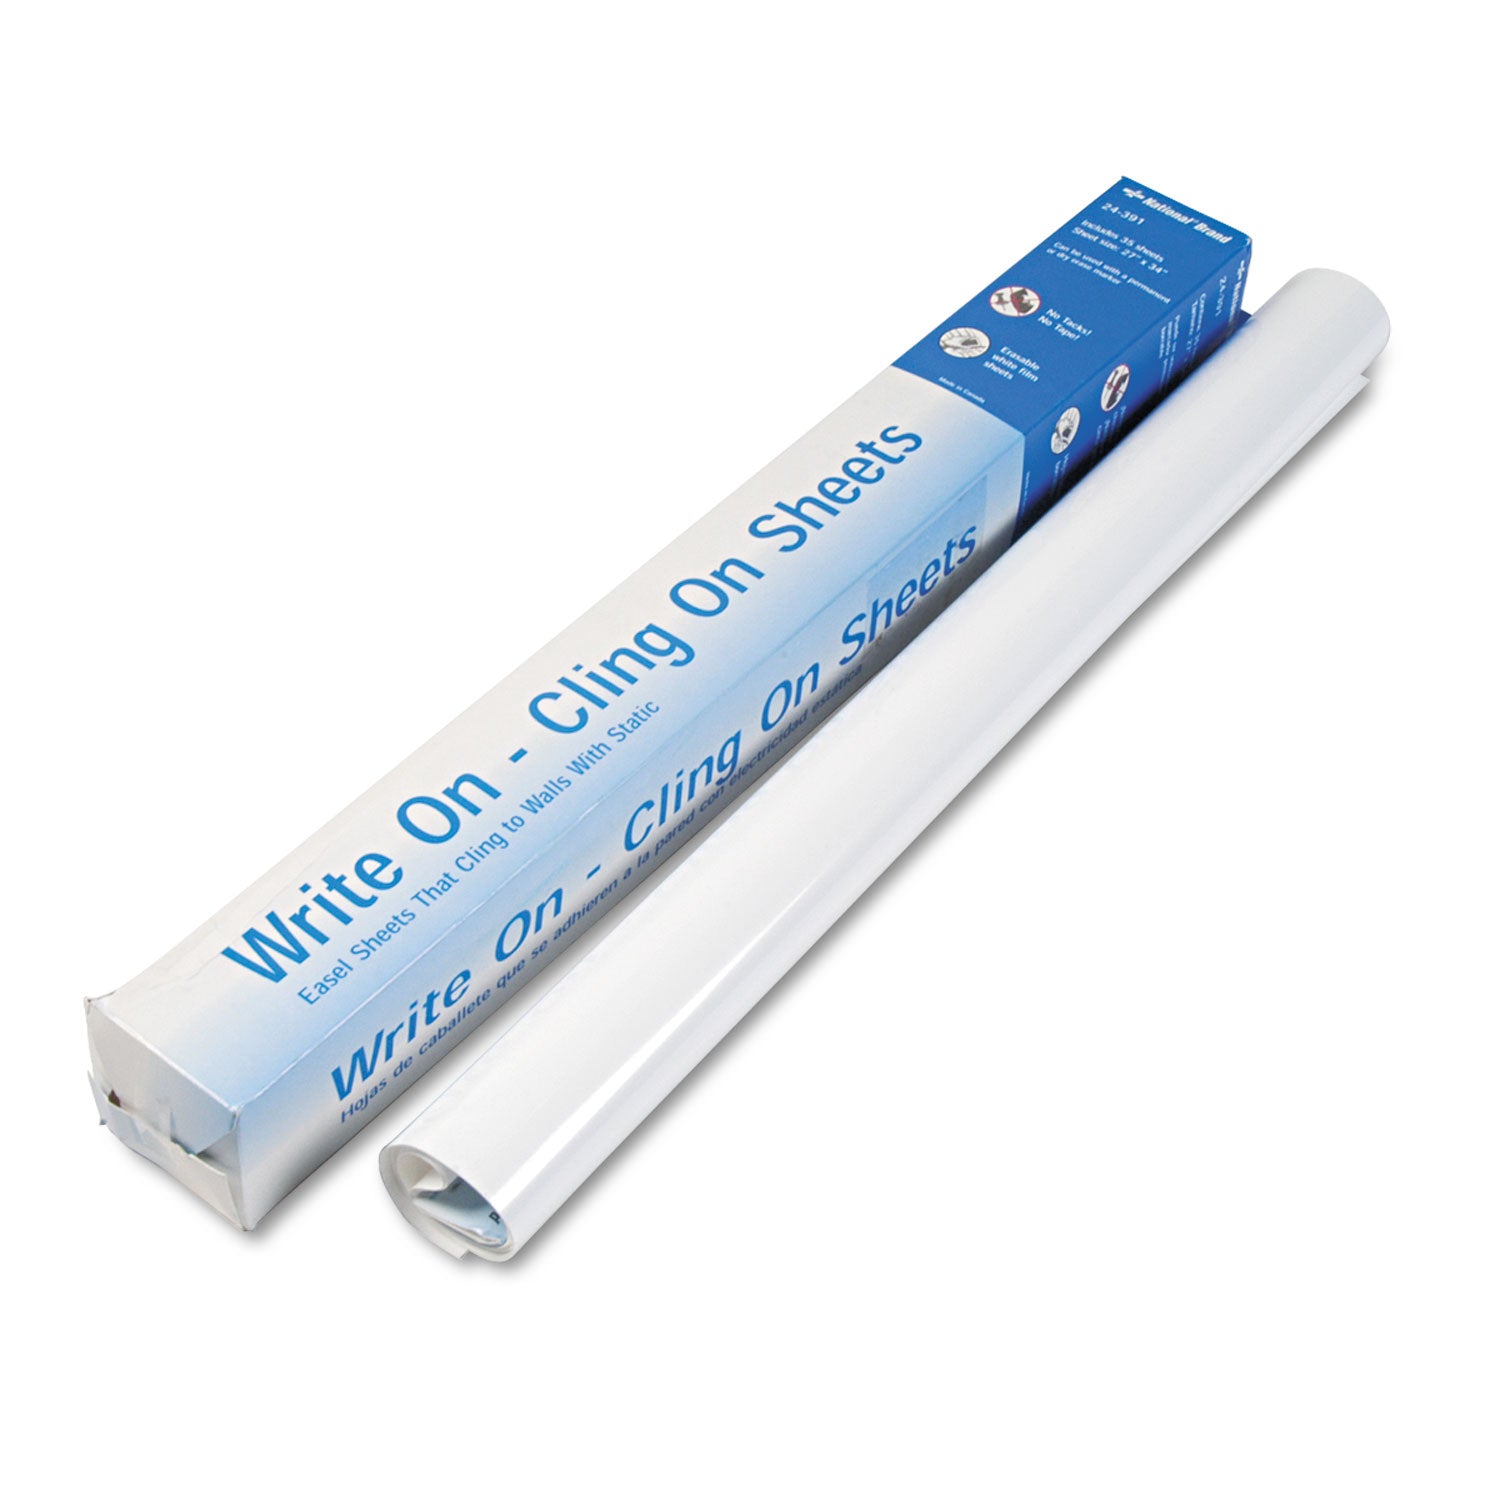 Write On-Cling On Easel Pad, Unruled, 27 x 34, White, 35 Sheets - 